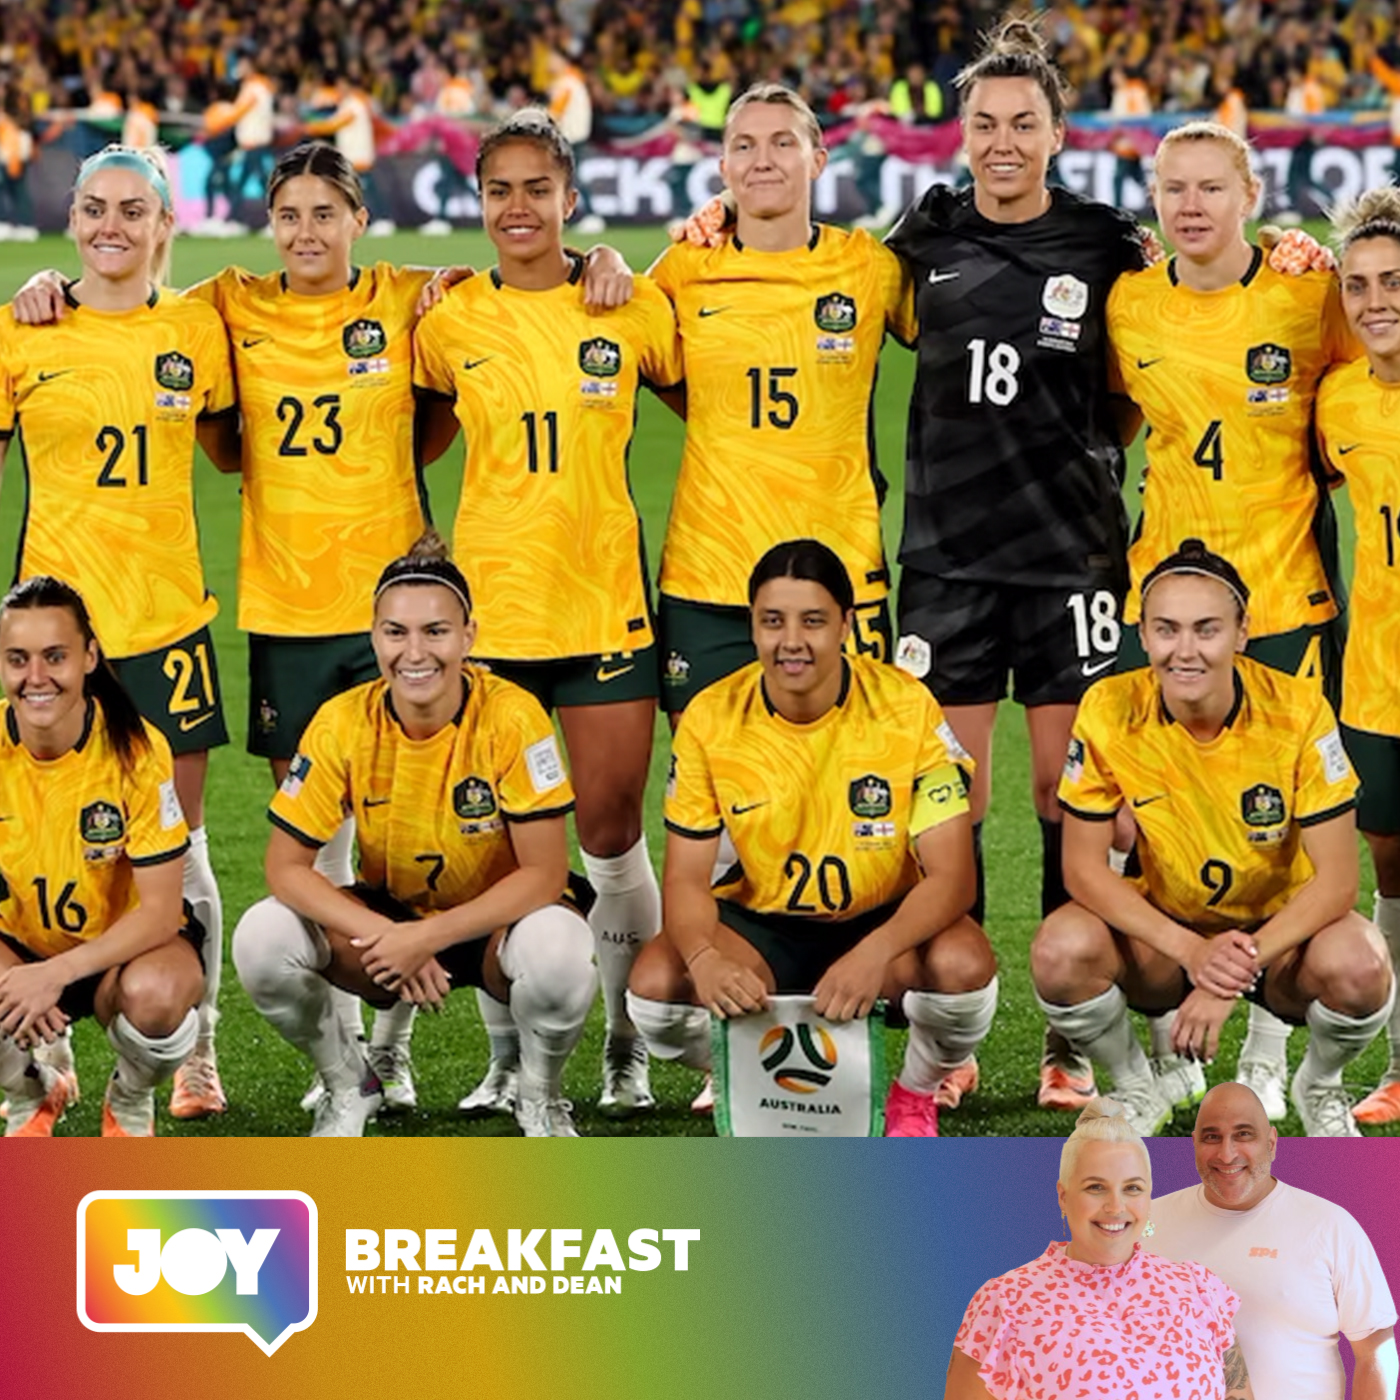 Will The Matildas qualify for the Olympics?